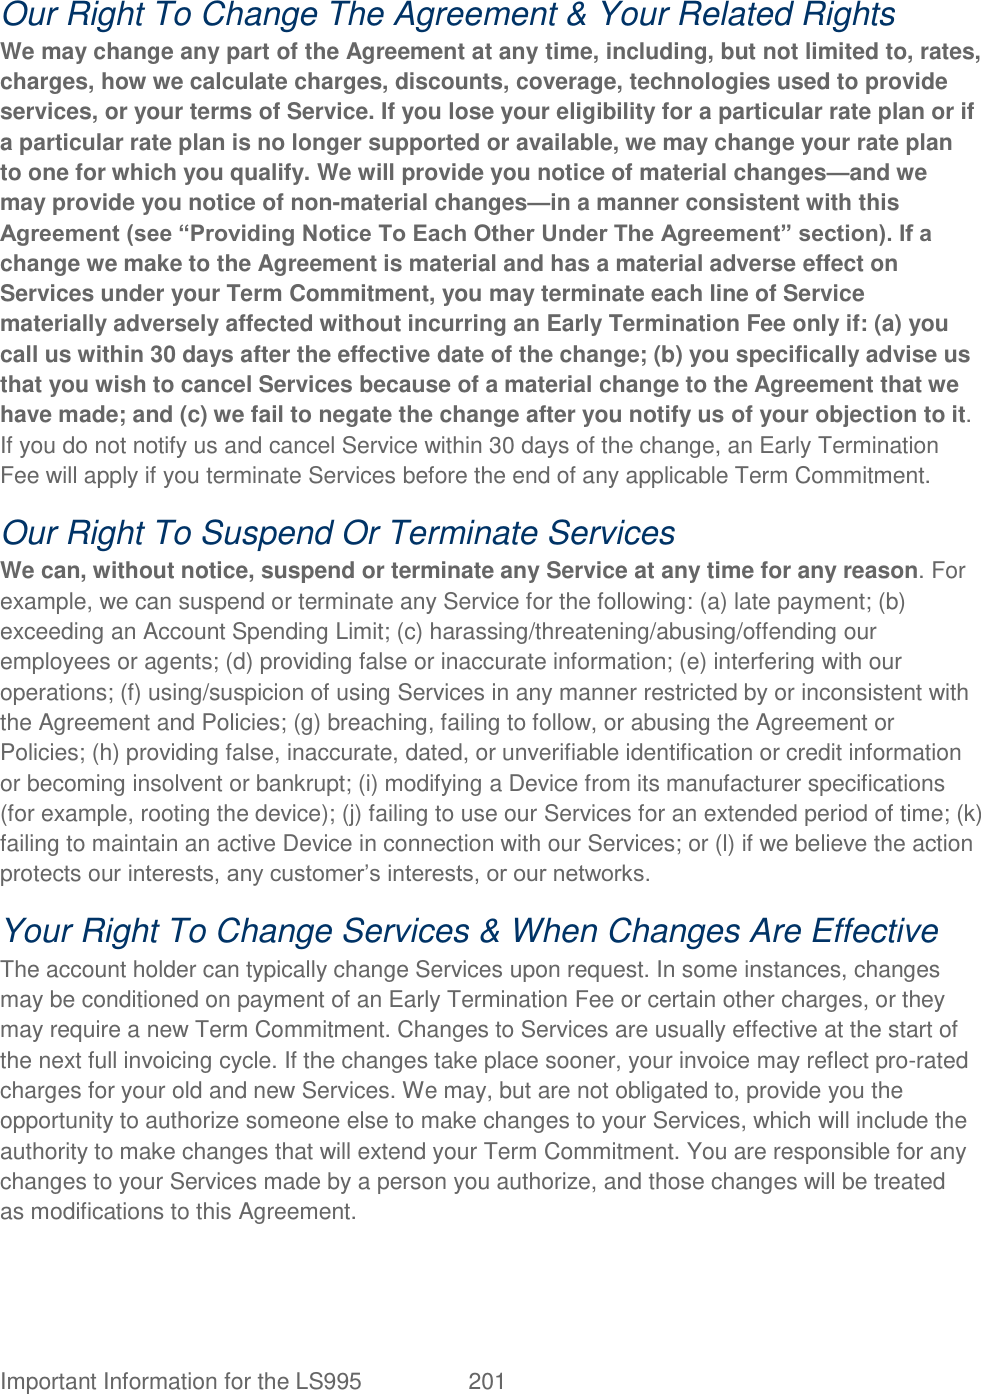  Important Information for the LS995  201   Our Right To Change The Agreement &amp; Your Related Rights We may change any part of the Agreement at any time, including, but not limited to, rates, charges, how we calculate charges, discounts, coverage, technologies used to provide services, or your terms of Service. If you lose your eligibility for a particular rate plan or if a particular rate plan is no longer supported or available, we may change your rate plan to one for which you qualify. We will provide you notice of material changes—and we may provide you notice of non-material changes—in a manner consistent with this Agreement (see ―Providing Notice To Each Other Under The Agreement‖ section). If a change we make to the Agreement is material and has a material adverse effect on Services under your Term Commitment, you may terminate each line of Service materially adversely affected without incurring an Early Termination Fee only if: (a) you call us within 30 days after the effective date of the change; (b) you specifically advise us that you wish to cancel Services because of a material change to the Agreement that we have made; and (c) we fail to negate the change after you notify us of your objection to it. If you do not notify us and cancel Service within 30 days of the change, an Early Termination Fee will apply if you terminate Services before the end of any applicable Term Commitment. Our Right To Suspend Or Terminate Services We can, without notice, suspend or terminate any Service at any time for any reason. For example, we can suspend or terminate any Service for the following: (a) late payment; (b) exceeding an Account Spending Limit; (c) harassing/threatening/abusing/offending our employees or agents; (d) providing false or inaccurate information; (e) interfering with our operations; (f) using/suspicion of using Services in any manner restricted by or inconsistent with the Agreement and Policies; (g) breaching, failing to follow, or abusing the Agreement or Policies; (h) providing false, inaccurate, dated, or unverifiable identification or credit information or becoming insolvent or bankrupt; (i) modifying a Device from its manufacturer specifications (for example, rooting the device); (j) failing to use our Services for an extended period of time; (k) failing to maintain an active Device in connection with our Services; or (l) if we believe the action protects our interests, any customer‘s interests, or our networks. Your Right To Change Services &amp; When Changes Are Effective The account holder can typically change Services upon request. In some instances, changes may be conditioned on payment of an Early Termination Fee or certain other charges, or they may require a new Term Commitment. Changes to Services are usually effective at the start of the next full invoicing cycle. If the changes take place sooner, your invoice may reflect pro-rated charges for your old and new Services. We may, but are not obligated to, provide you the opportunity to authorize someone else to make changes to your Services, which will include the authority to make changes that will extend your Term Commitment. You are responsible for any changes to your Services made by a person you authorize, and those changes will be treated as modifications to this Agreement. 